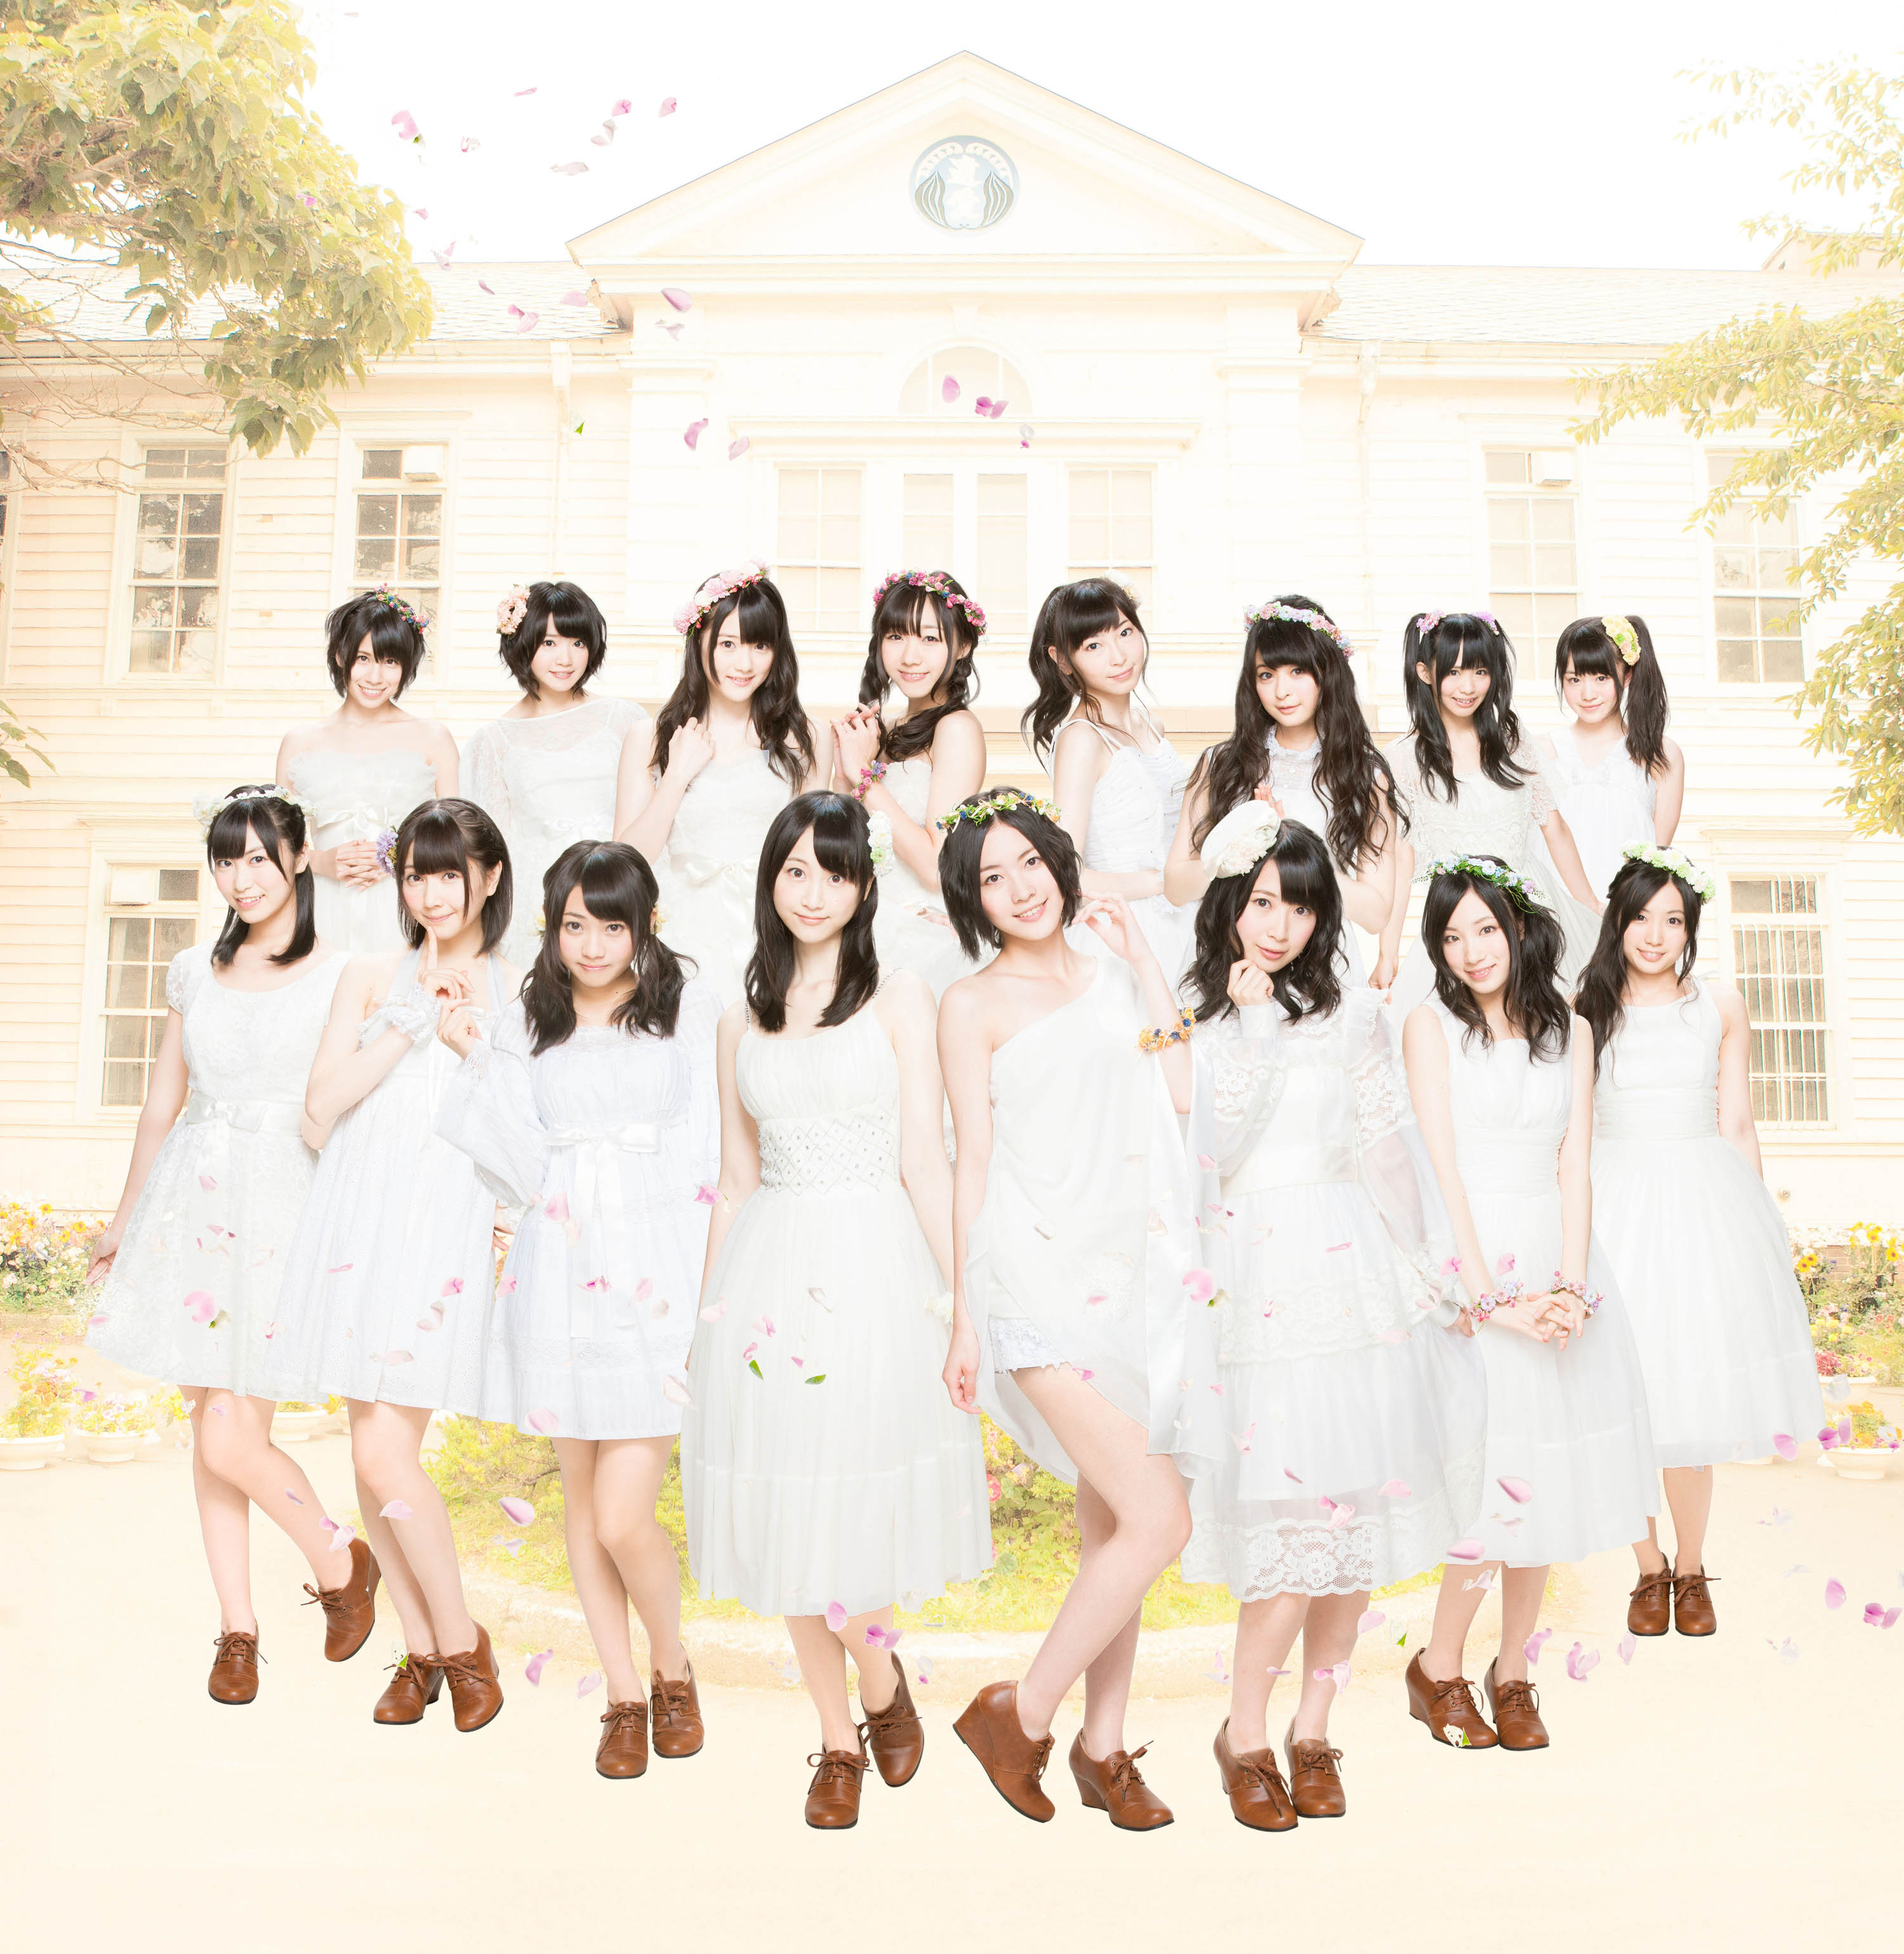 SKE48 has revealed that the title of their upcoming 11th single will be “Choco no Dorei“.